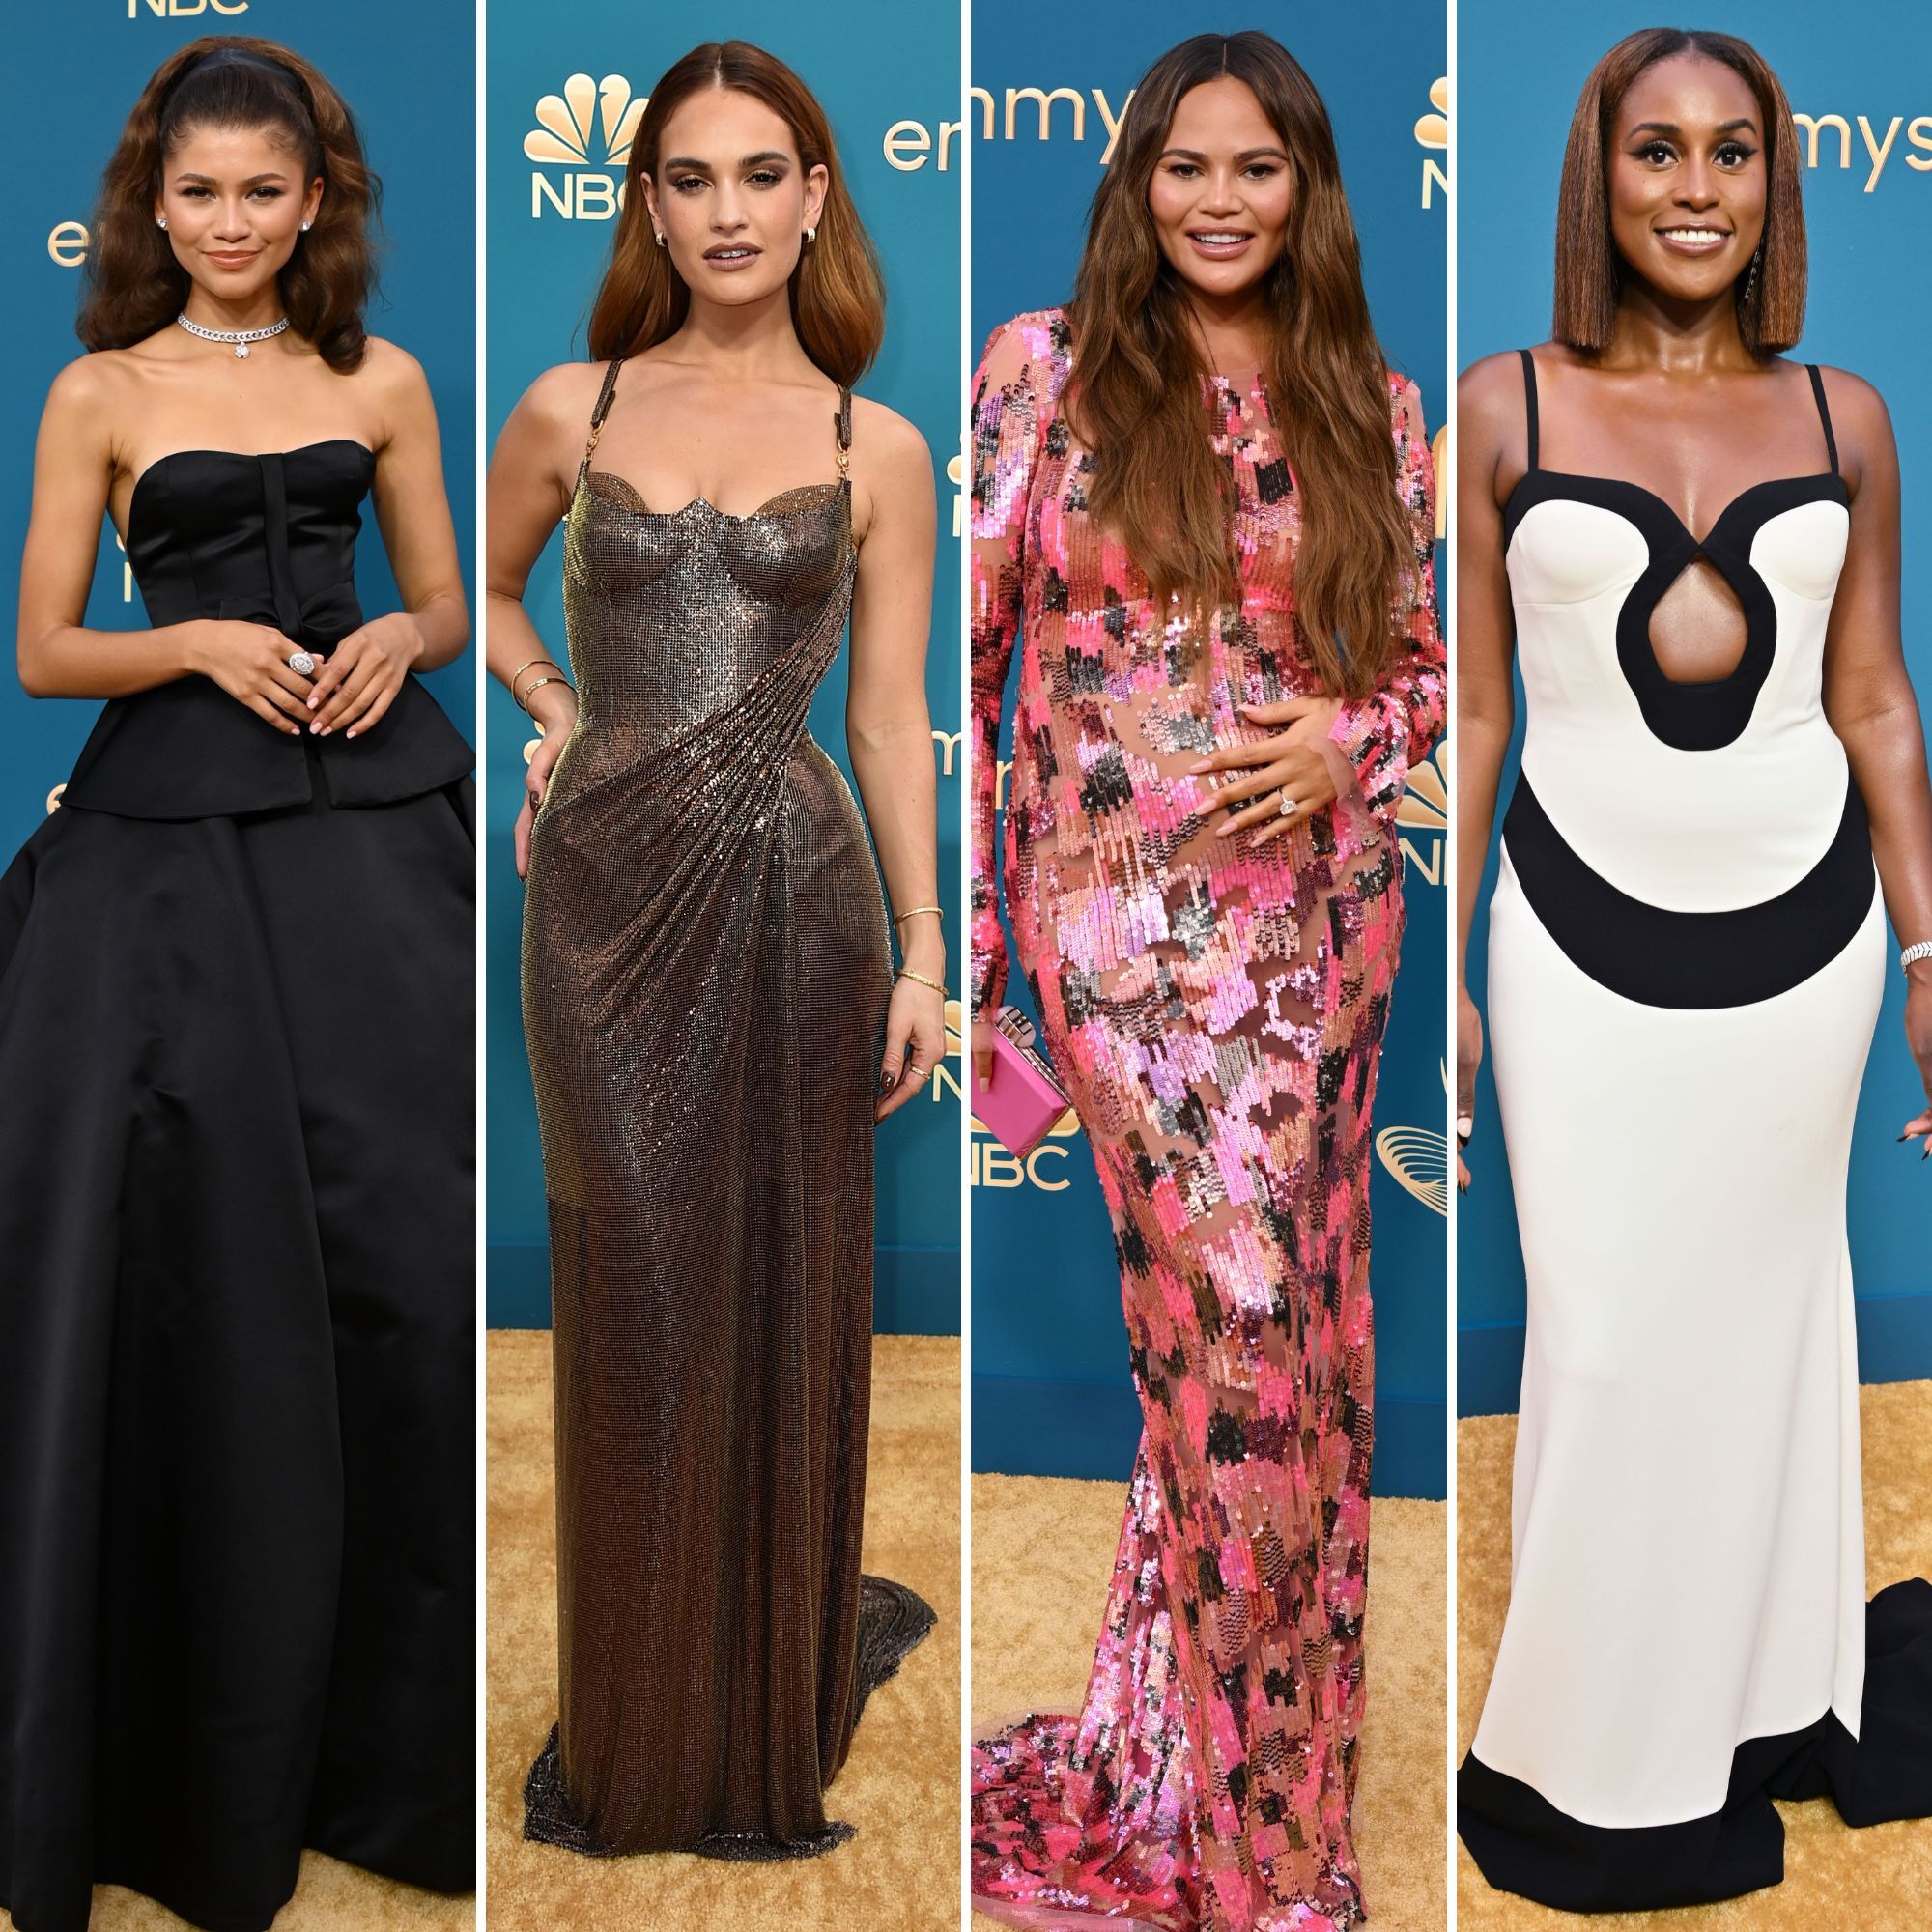 Emmys fashion: The 2022 red carpet highlights